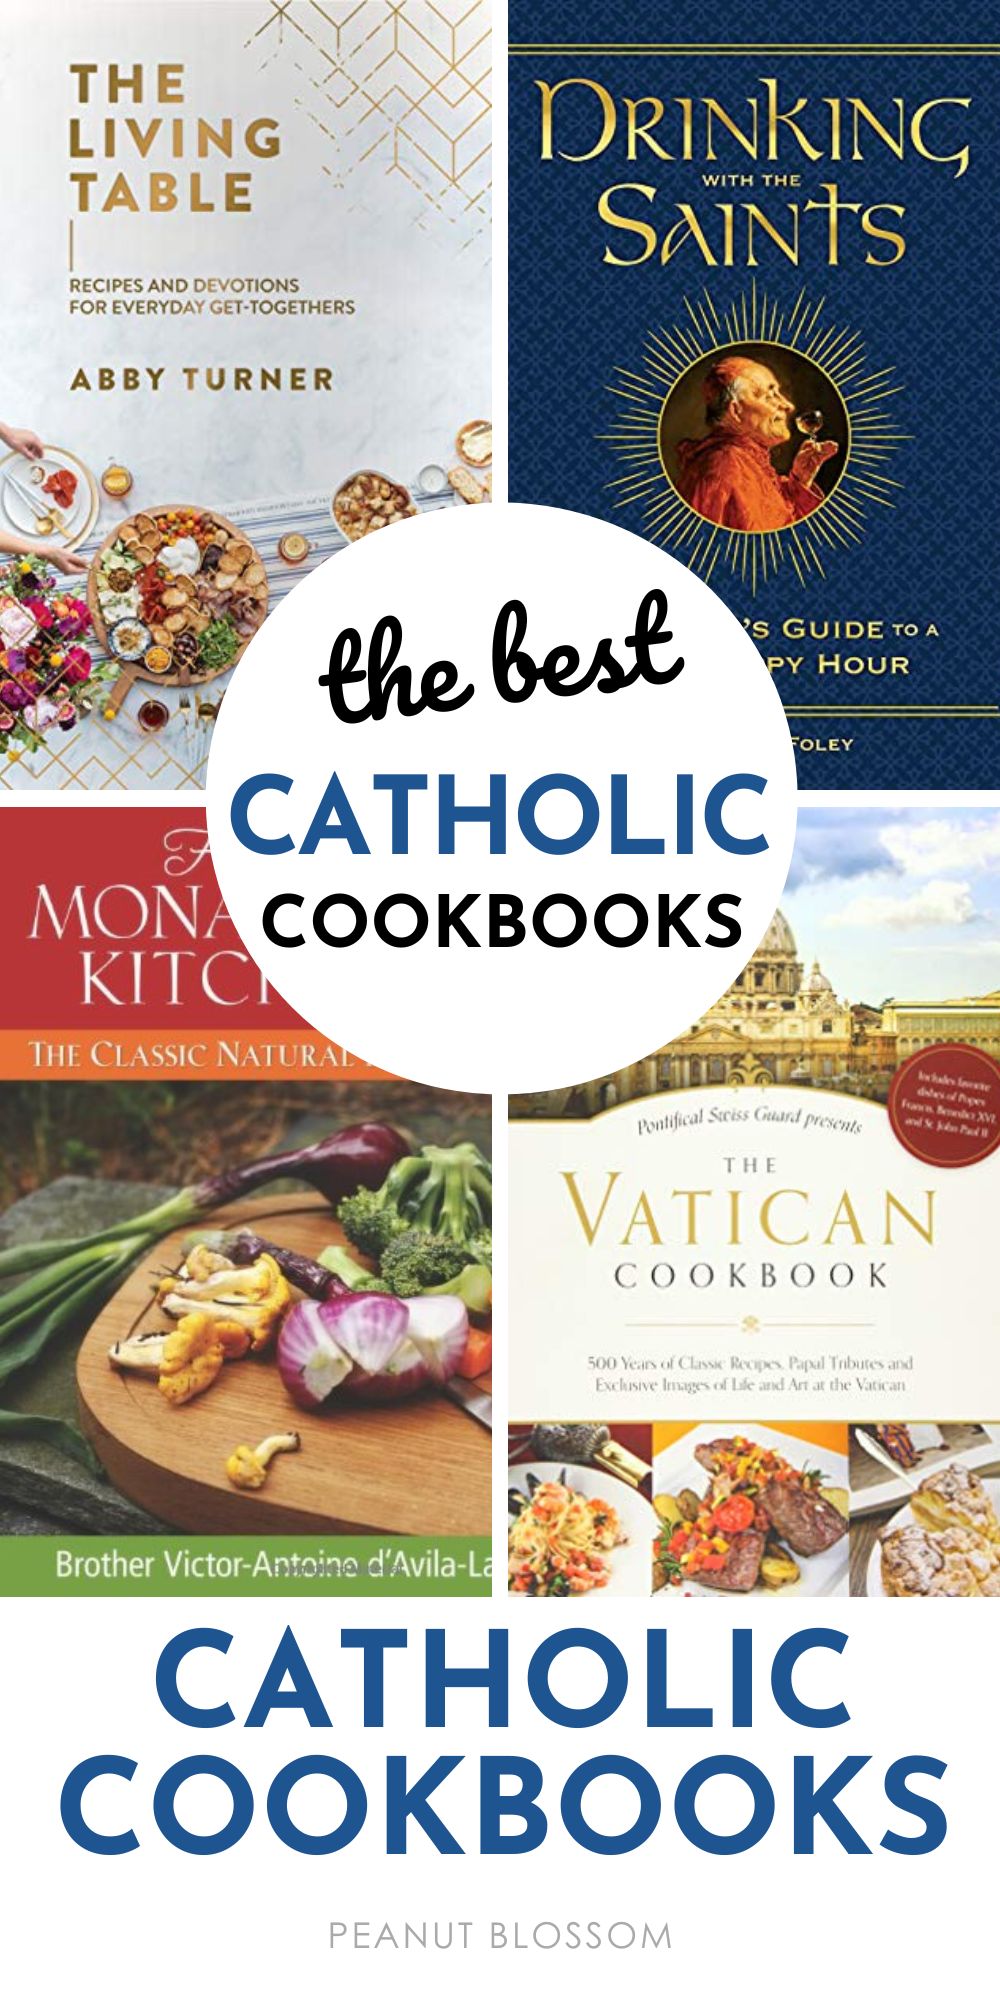 A photo collage shows the covers of 4 popular cookbooks for Catholics.